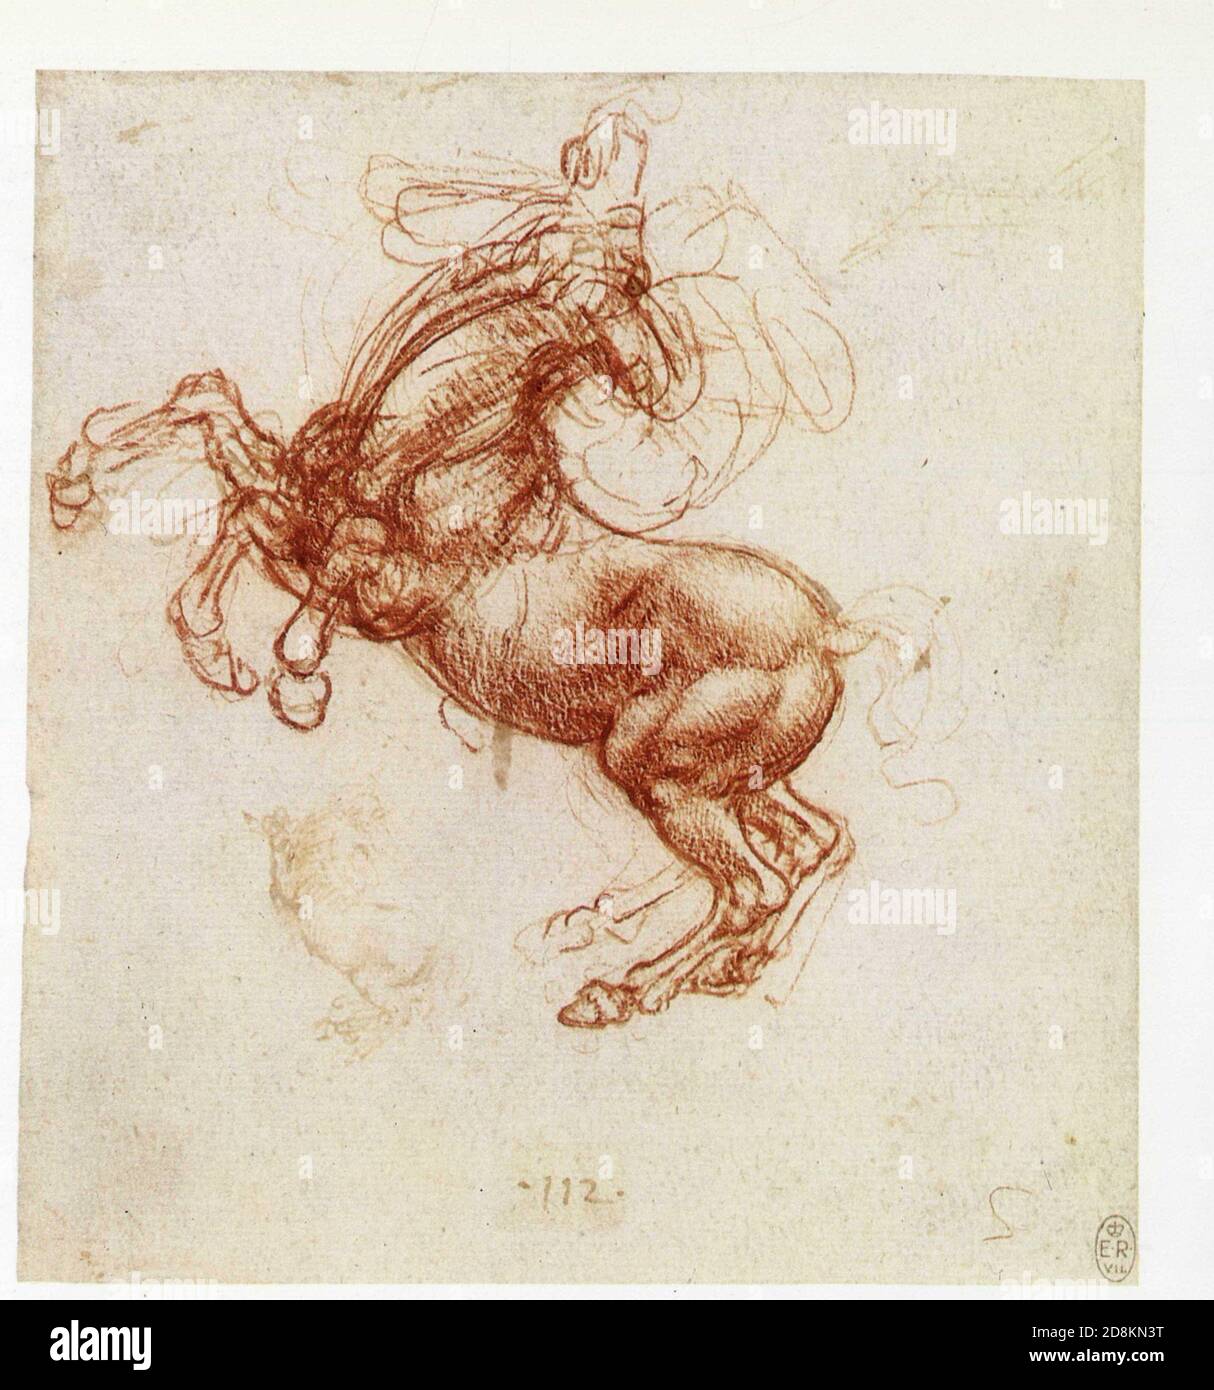 Leonardo da Vinci. A rearing horse. 1505. Red chalk with traces of pen and ink Stock Photo